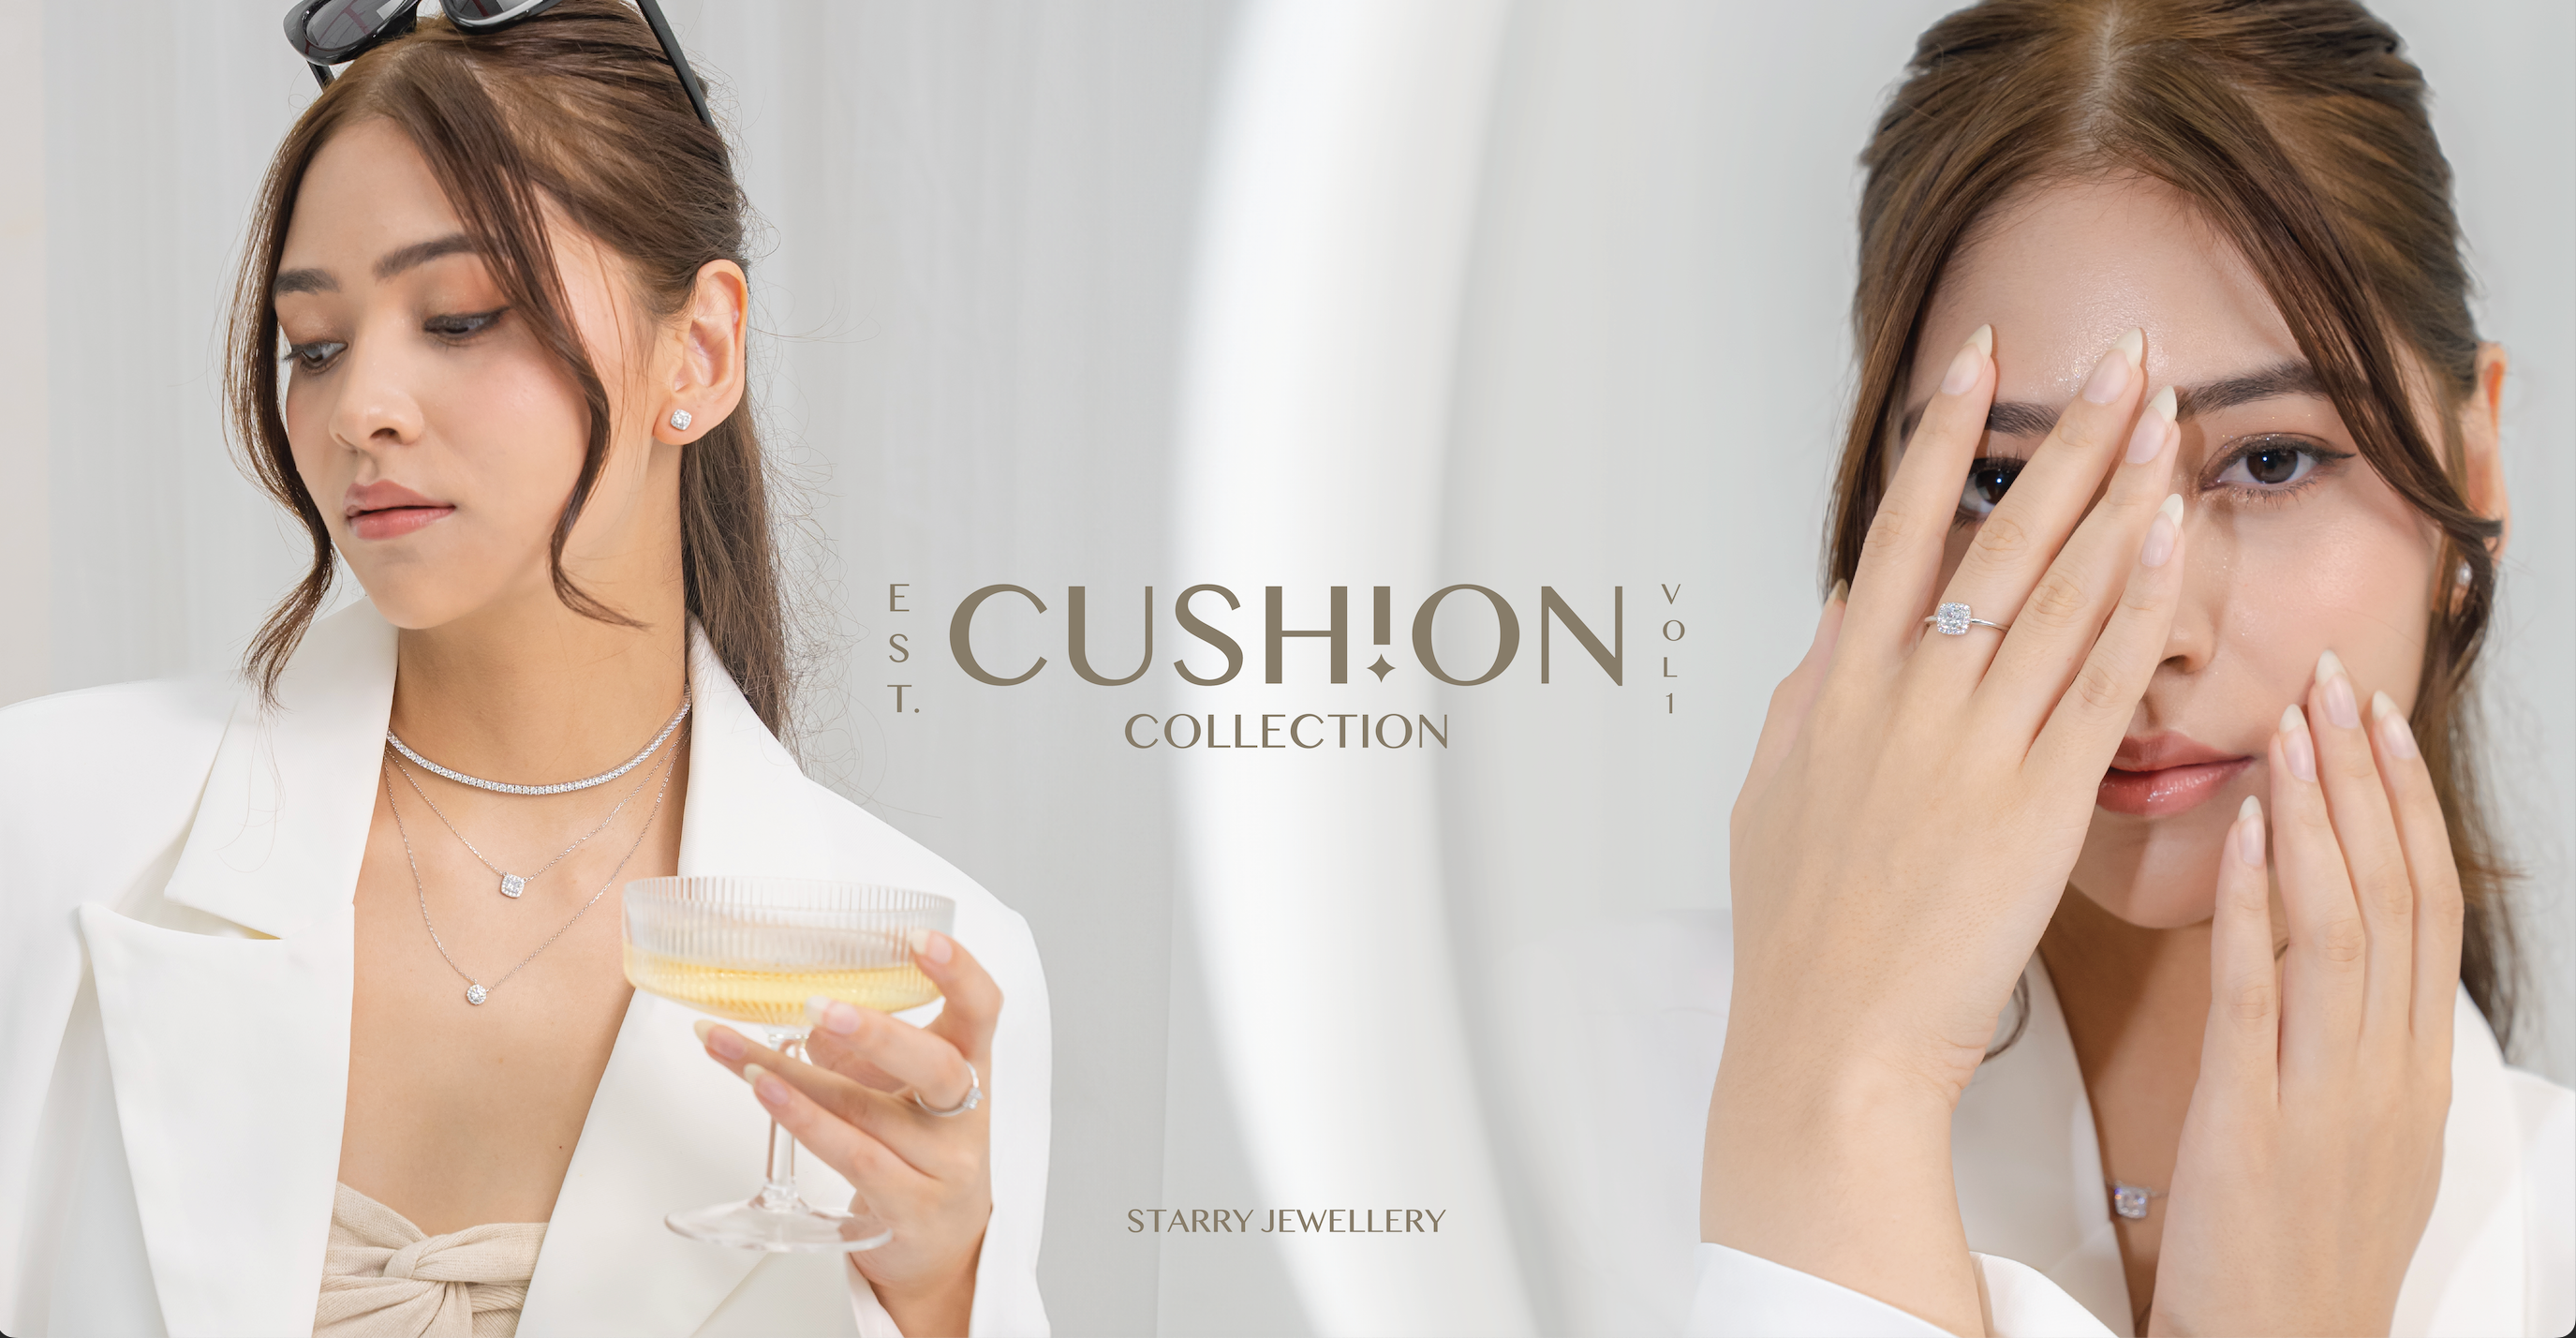 THE CUSHION CUT COLLECTION